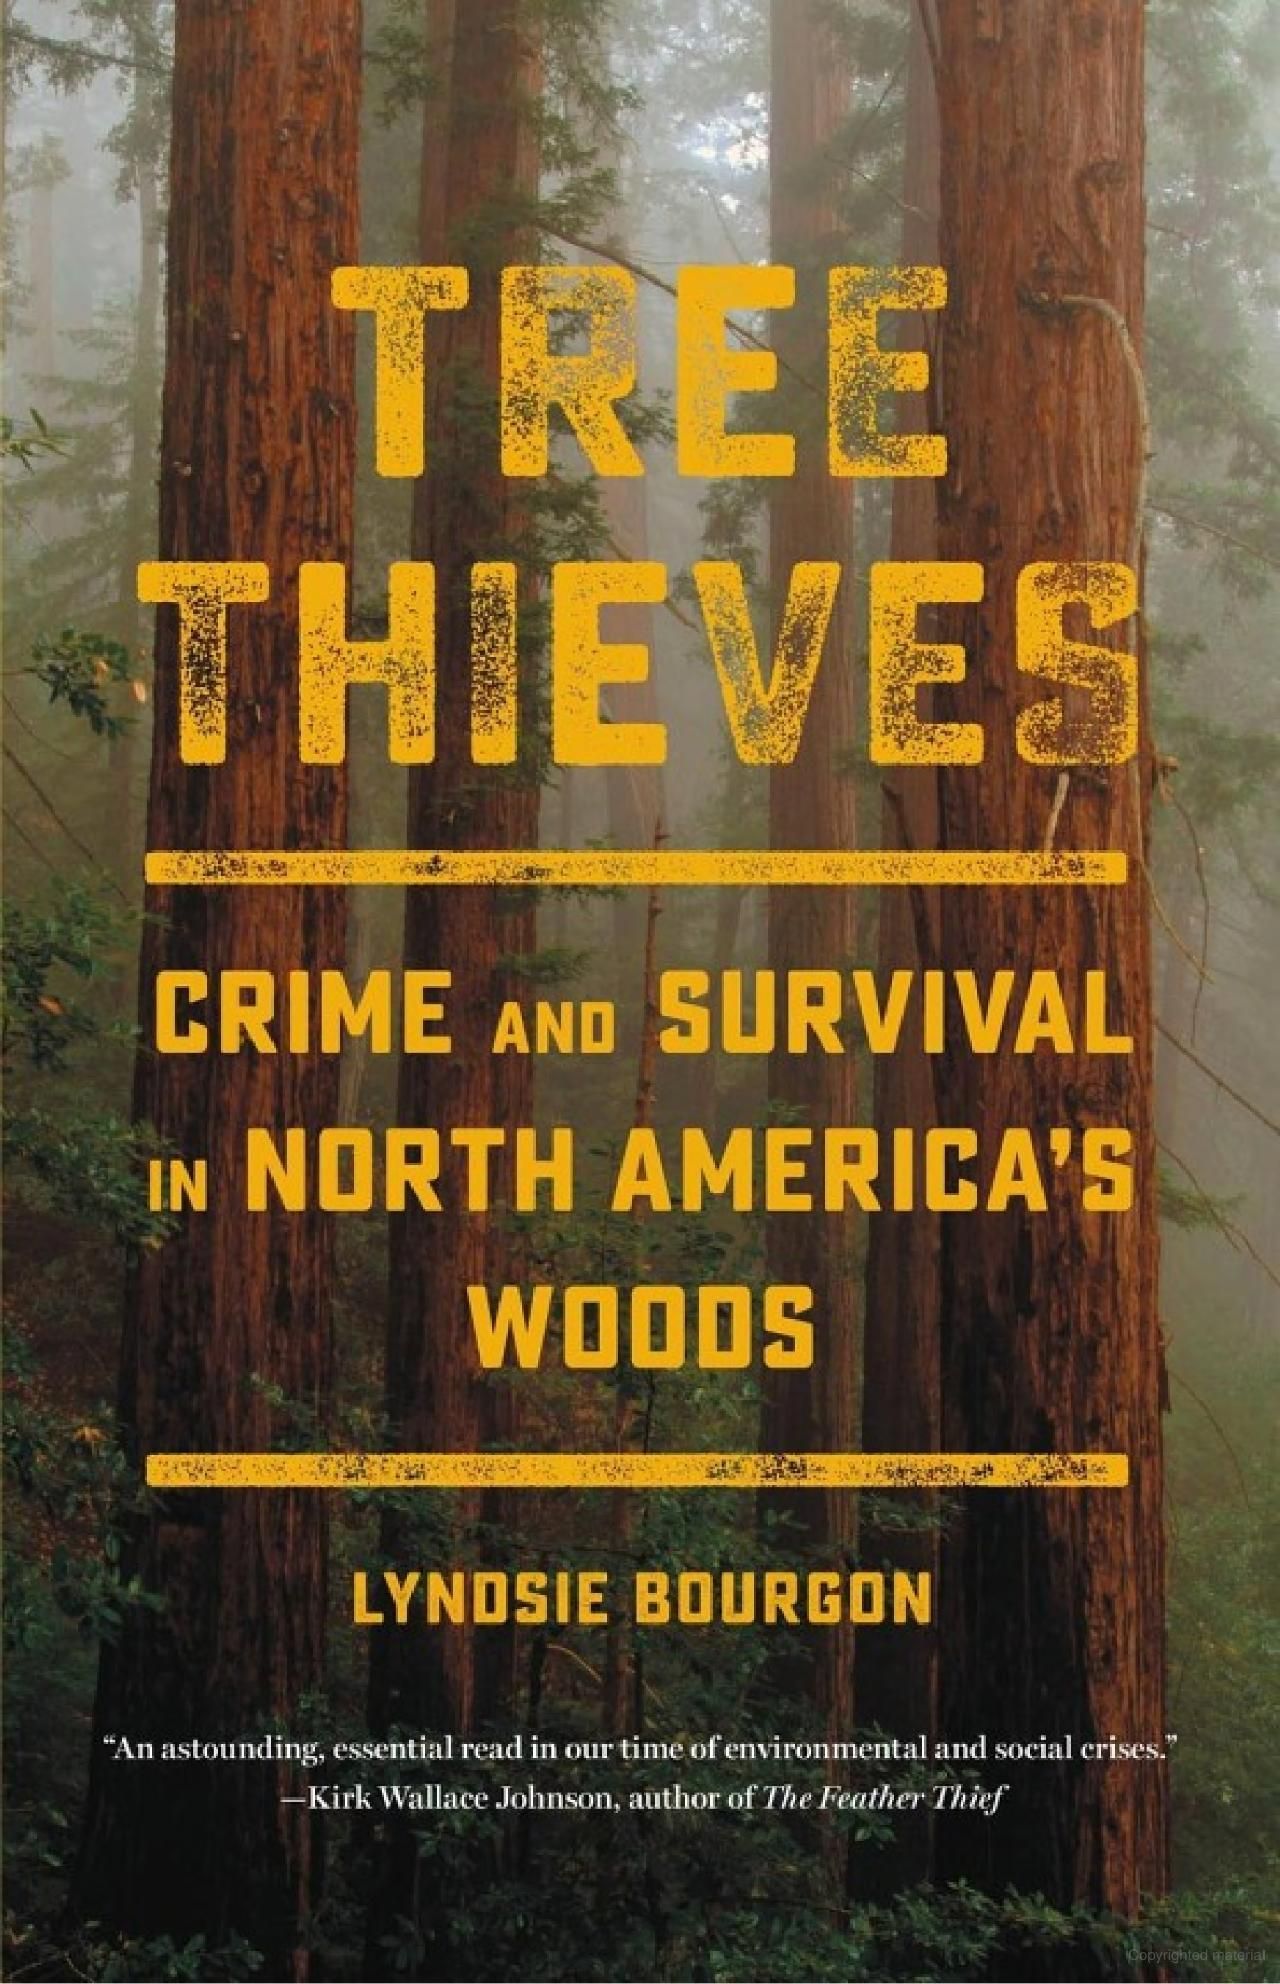 Is Stealing Redwoods Sometimes Okay?: On Lyndsie Bourgon’s “Tree Thieves”